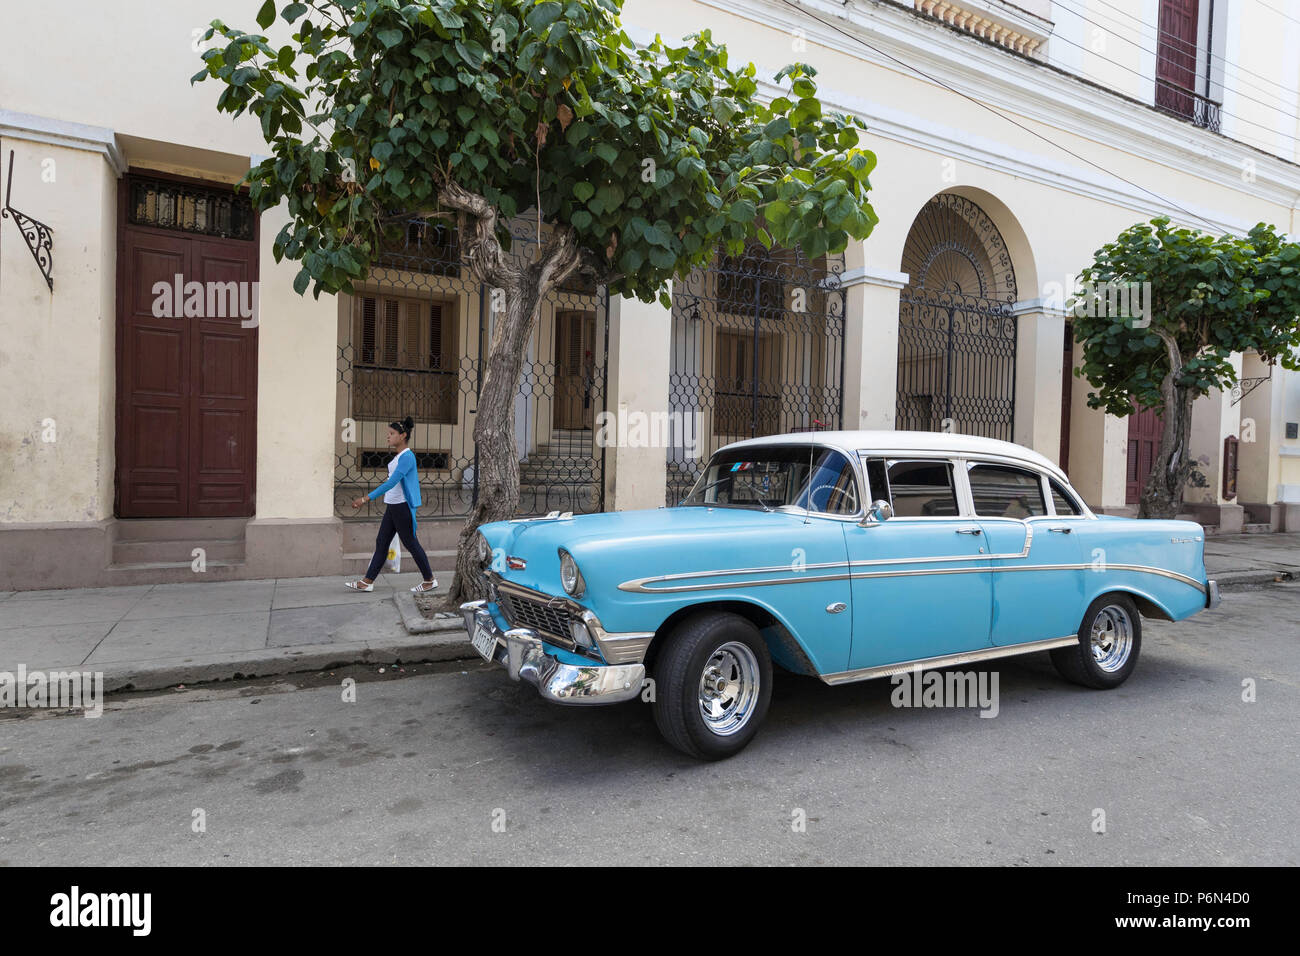 Classic 1956 Chevrolet Bel Air taxi, locally known as 'almendrones' in the town of Cienfuegos, Cuba. Stock Photo